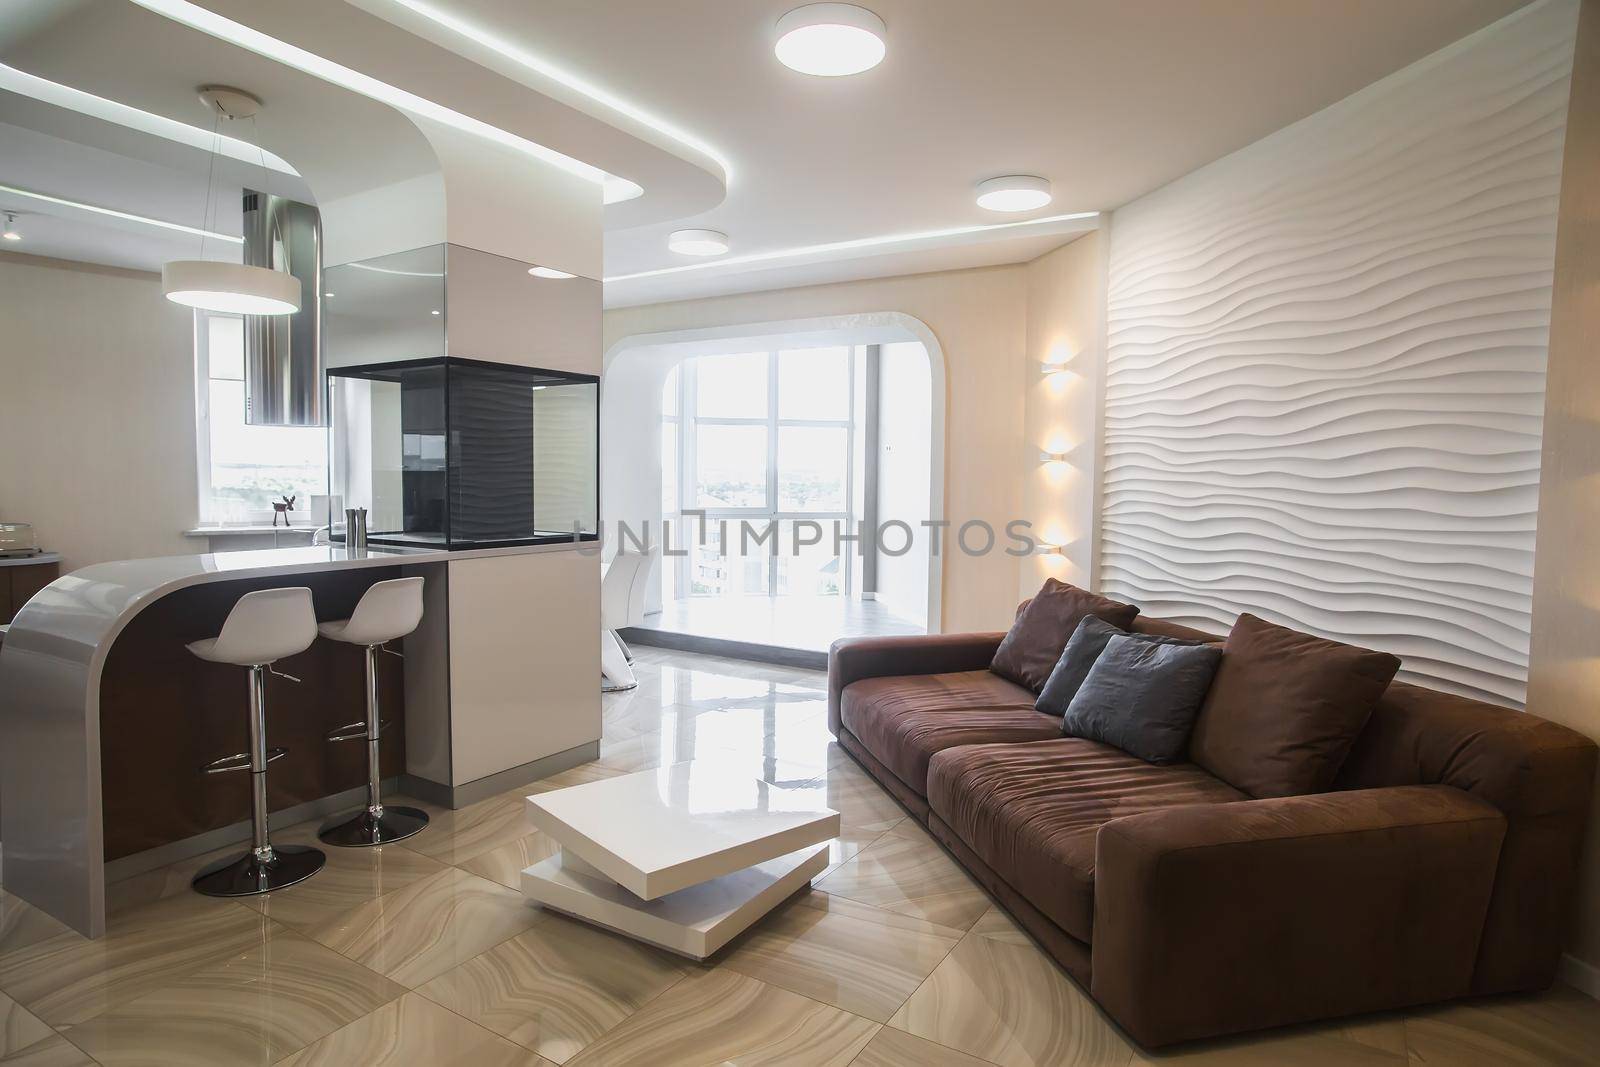 Beautiful modern apartment interier. Real estate concept. Nice real designed interior.